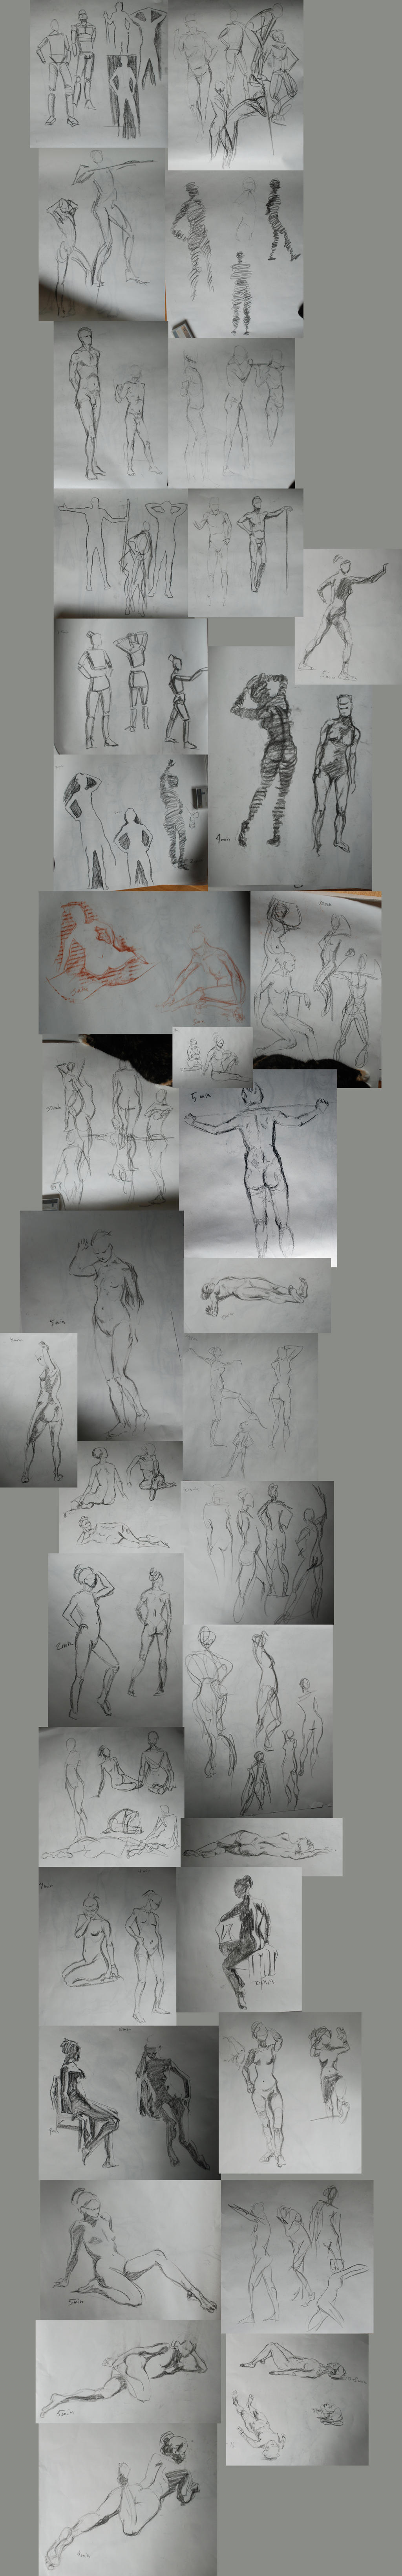 [Image: lifedrawing_by_canoda-d562m54.jpg]